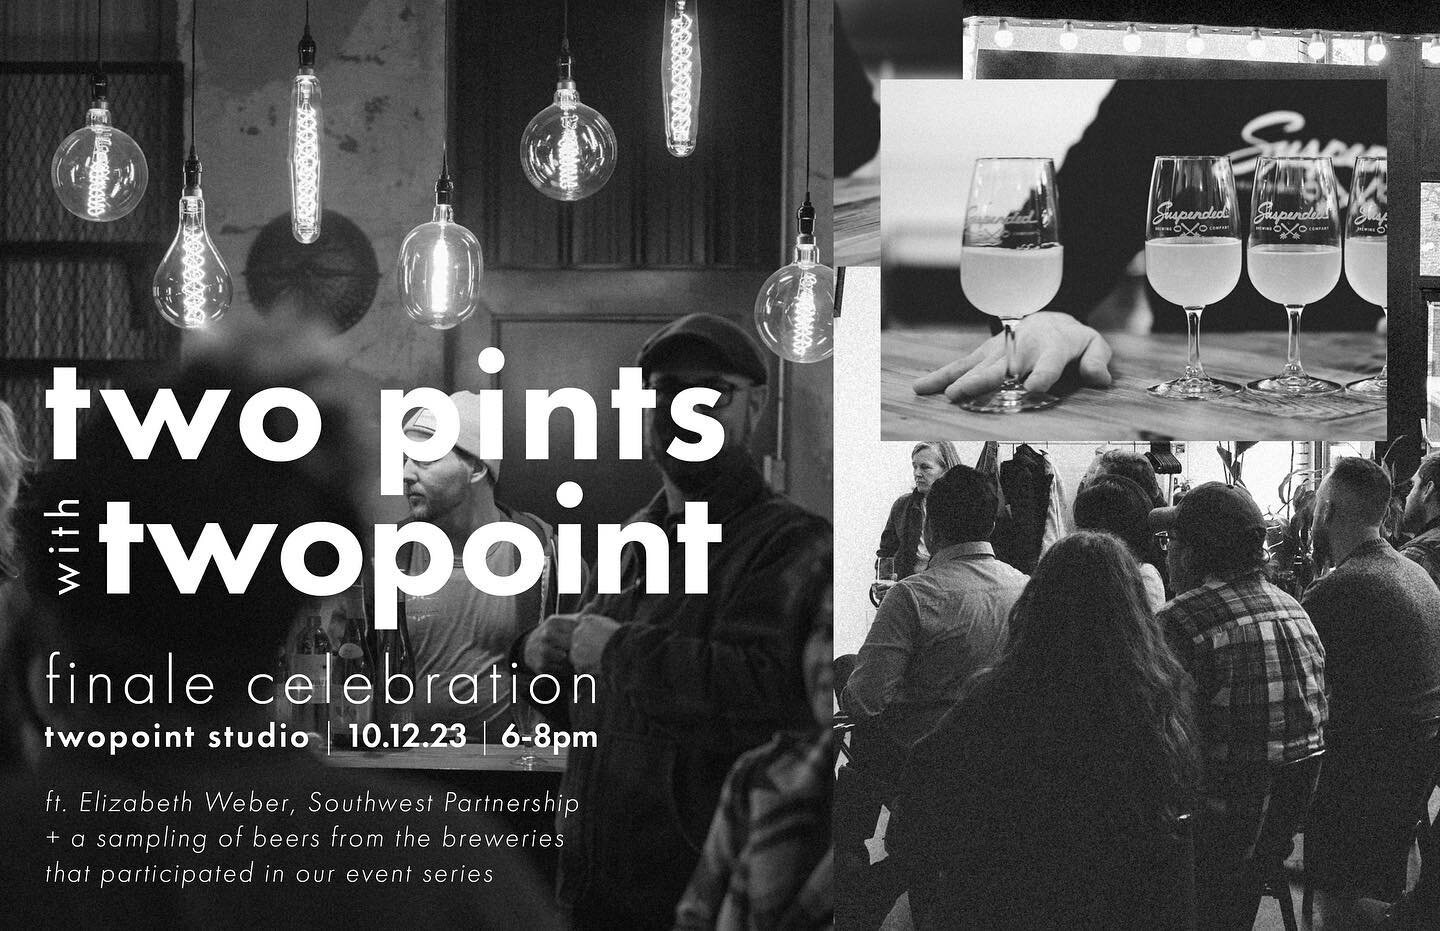 TwoPints with TwoPoint Finale Celebration! Join us next Thursday, Oct. 12, from 6-8pm at our offices in Fells Point to celebrate the end of our 20th anniversary event series. We will have a sampling of beers from the breweries that participated, some